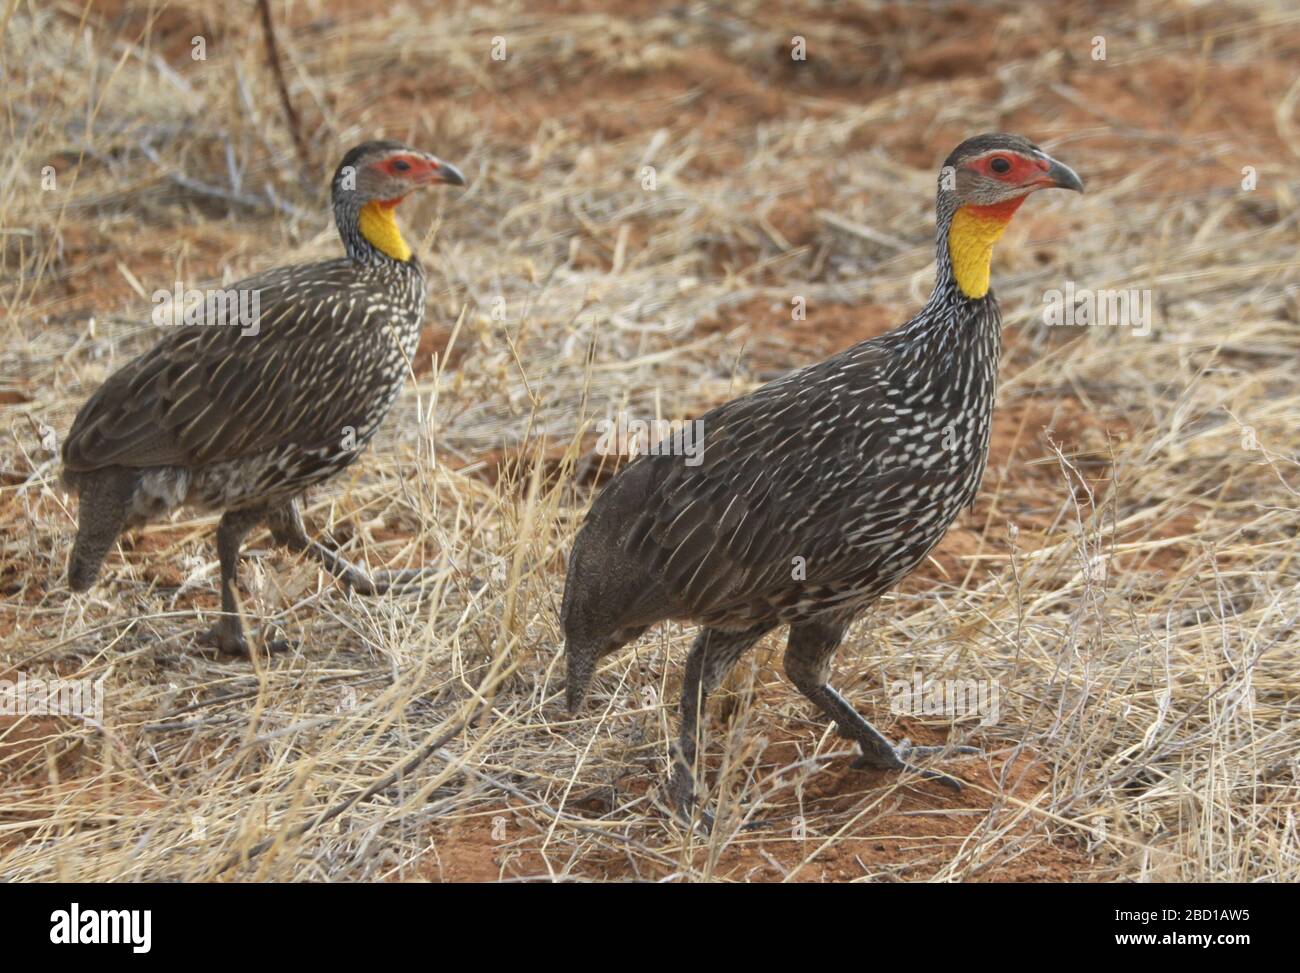 yellow-necked spurfowl or yellow-necked francolin (Pternistis leucoscepus) is a species of bird in the family Phasianidae. It is found in Djibouti, Er Stock Photo